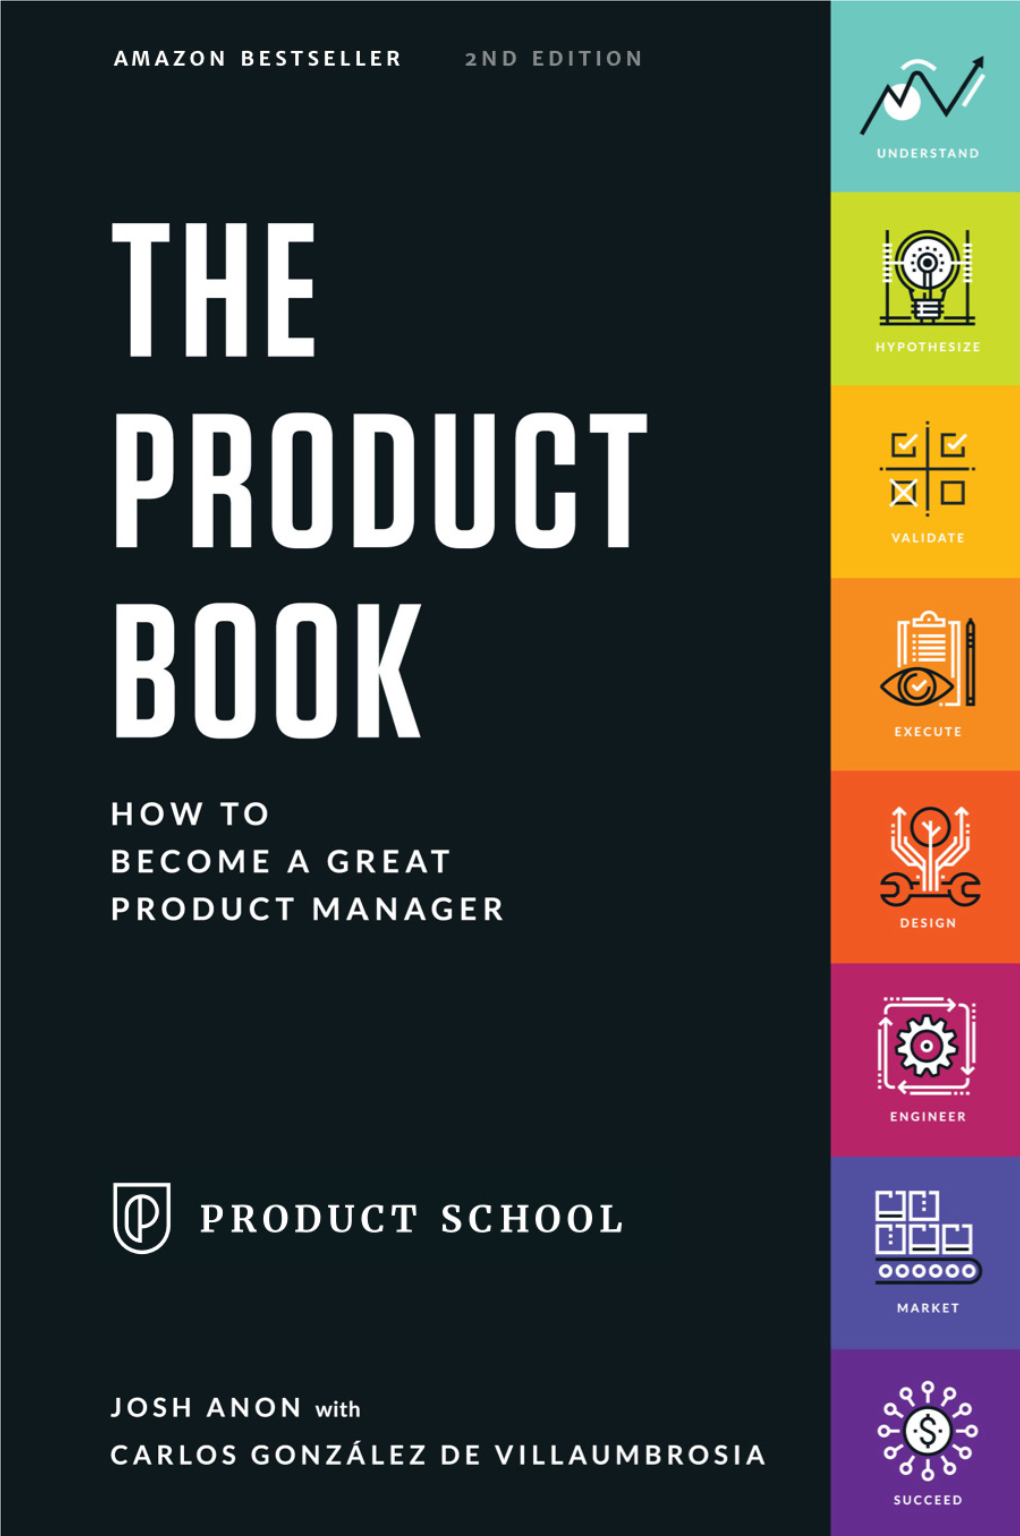 The Product Book: How to Become a Great Product Manager Copyright ©2017 Product School All Rights Reserved